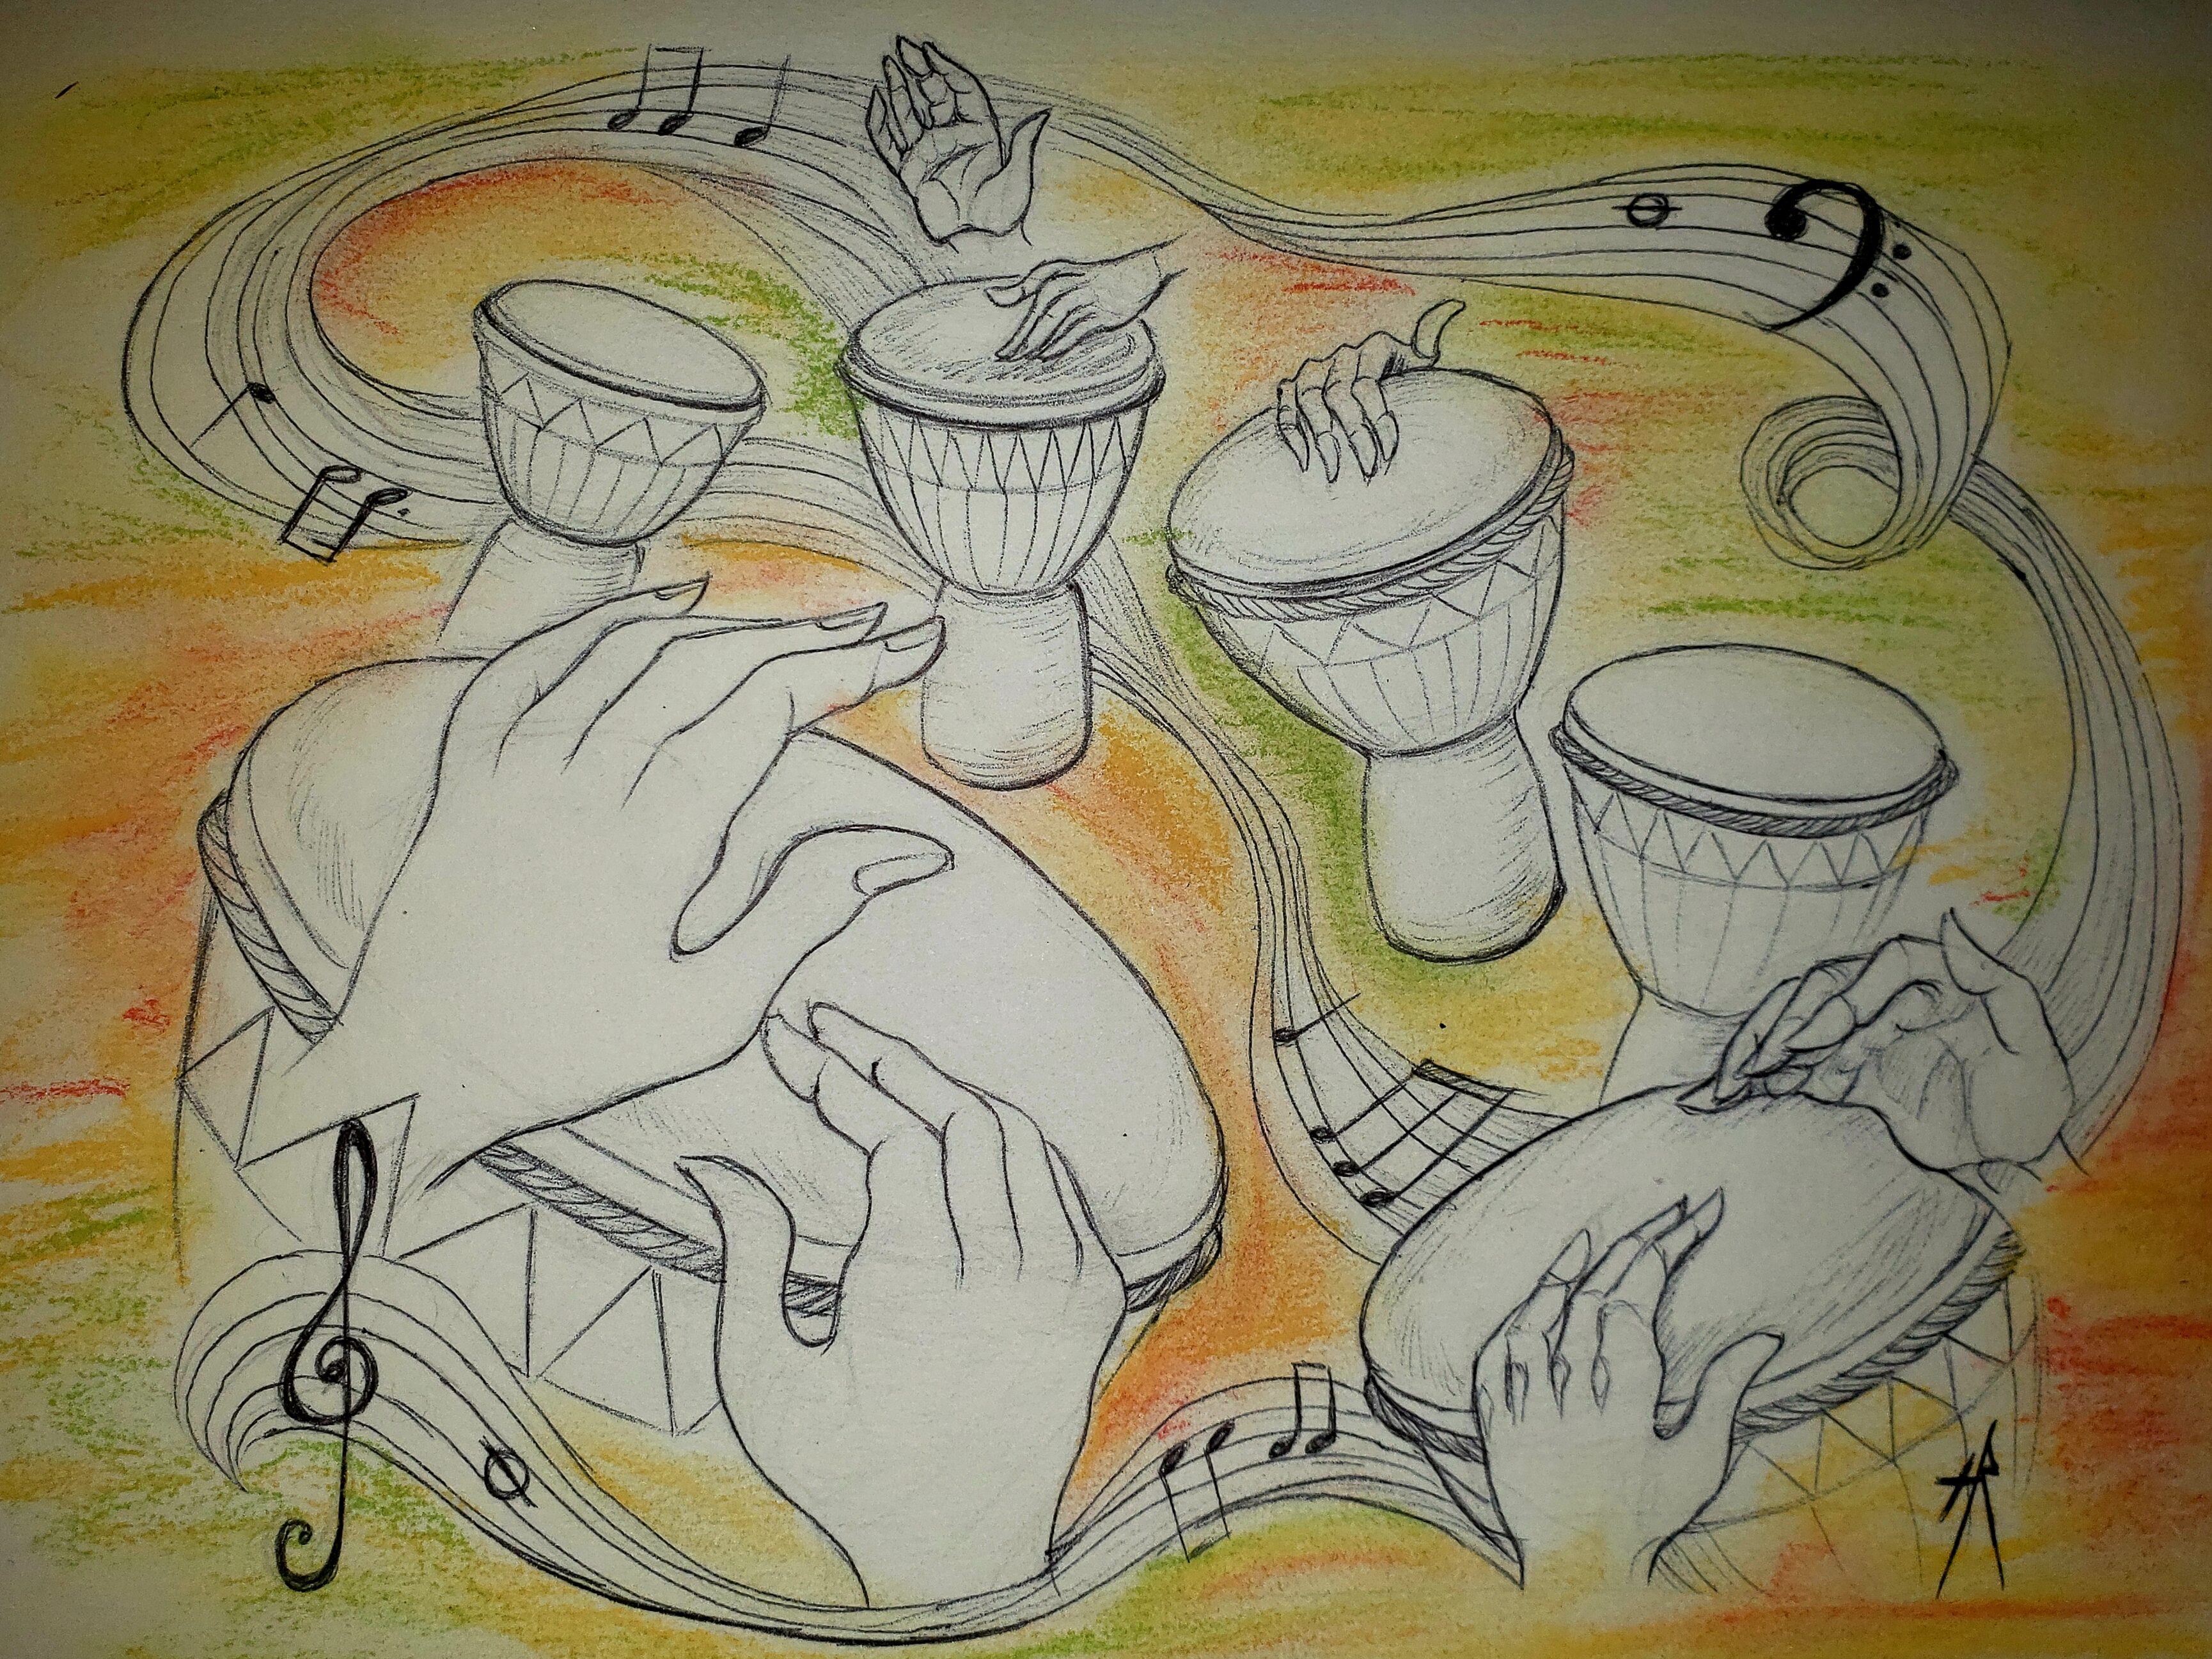 Djembe drums connect music to soul